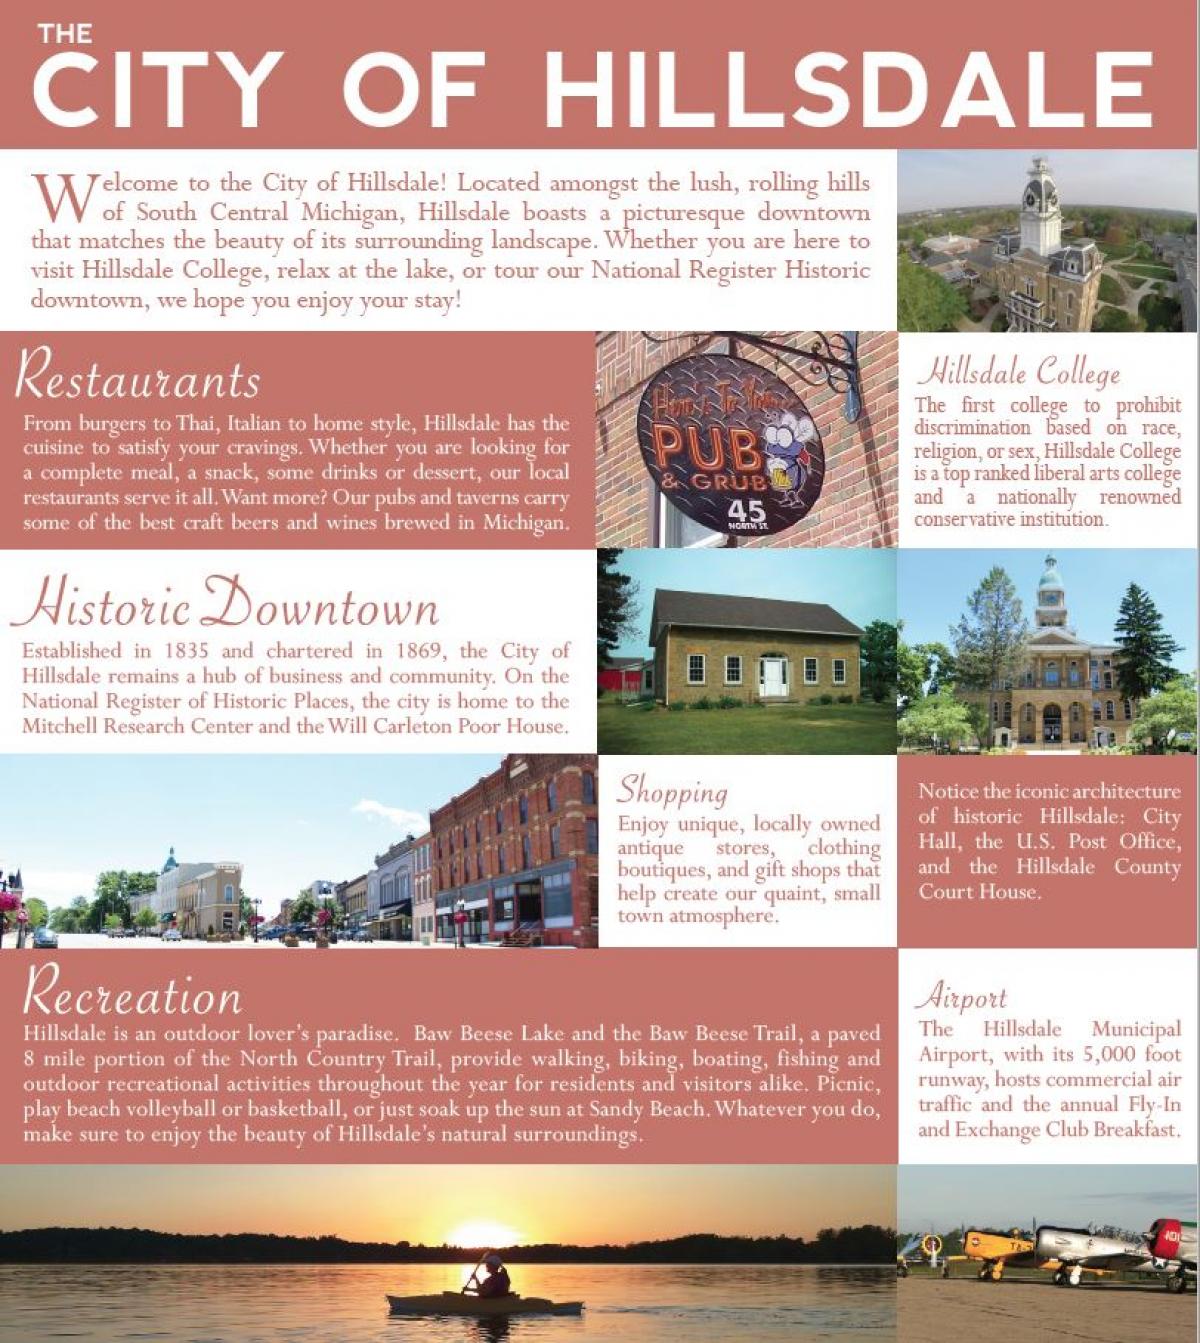 Welcome to the City of Hillsdale